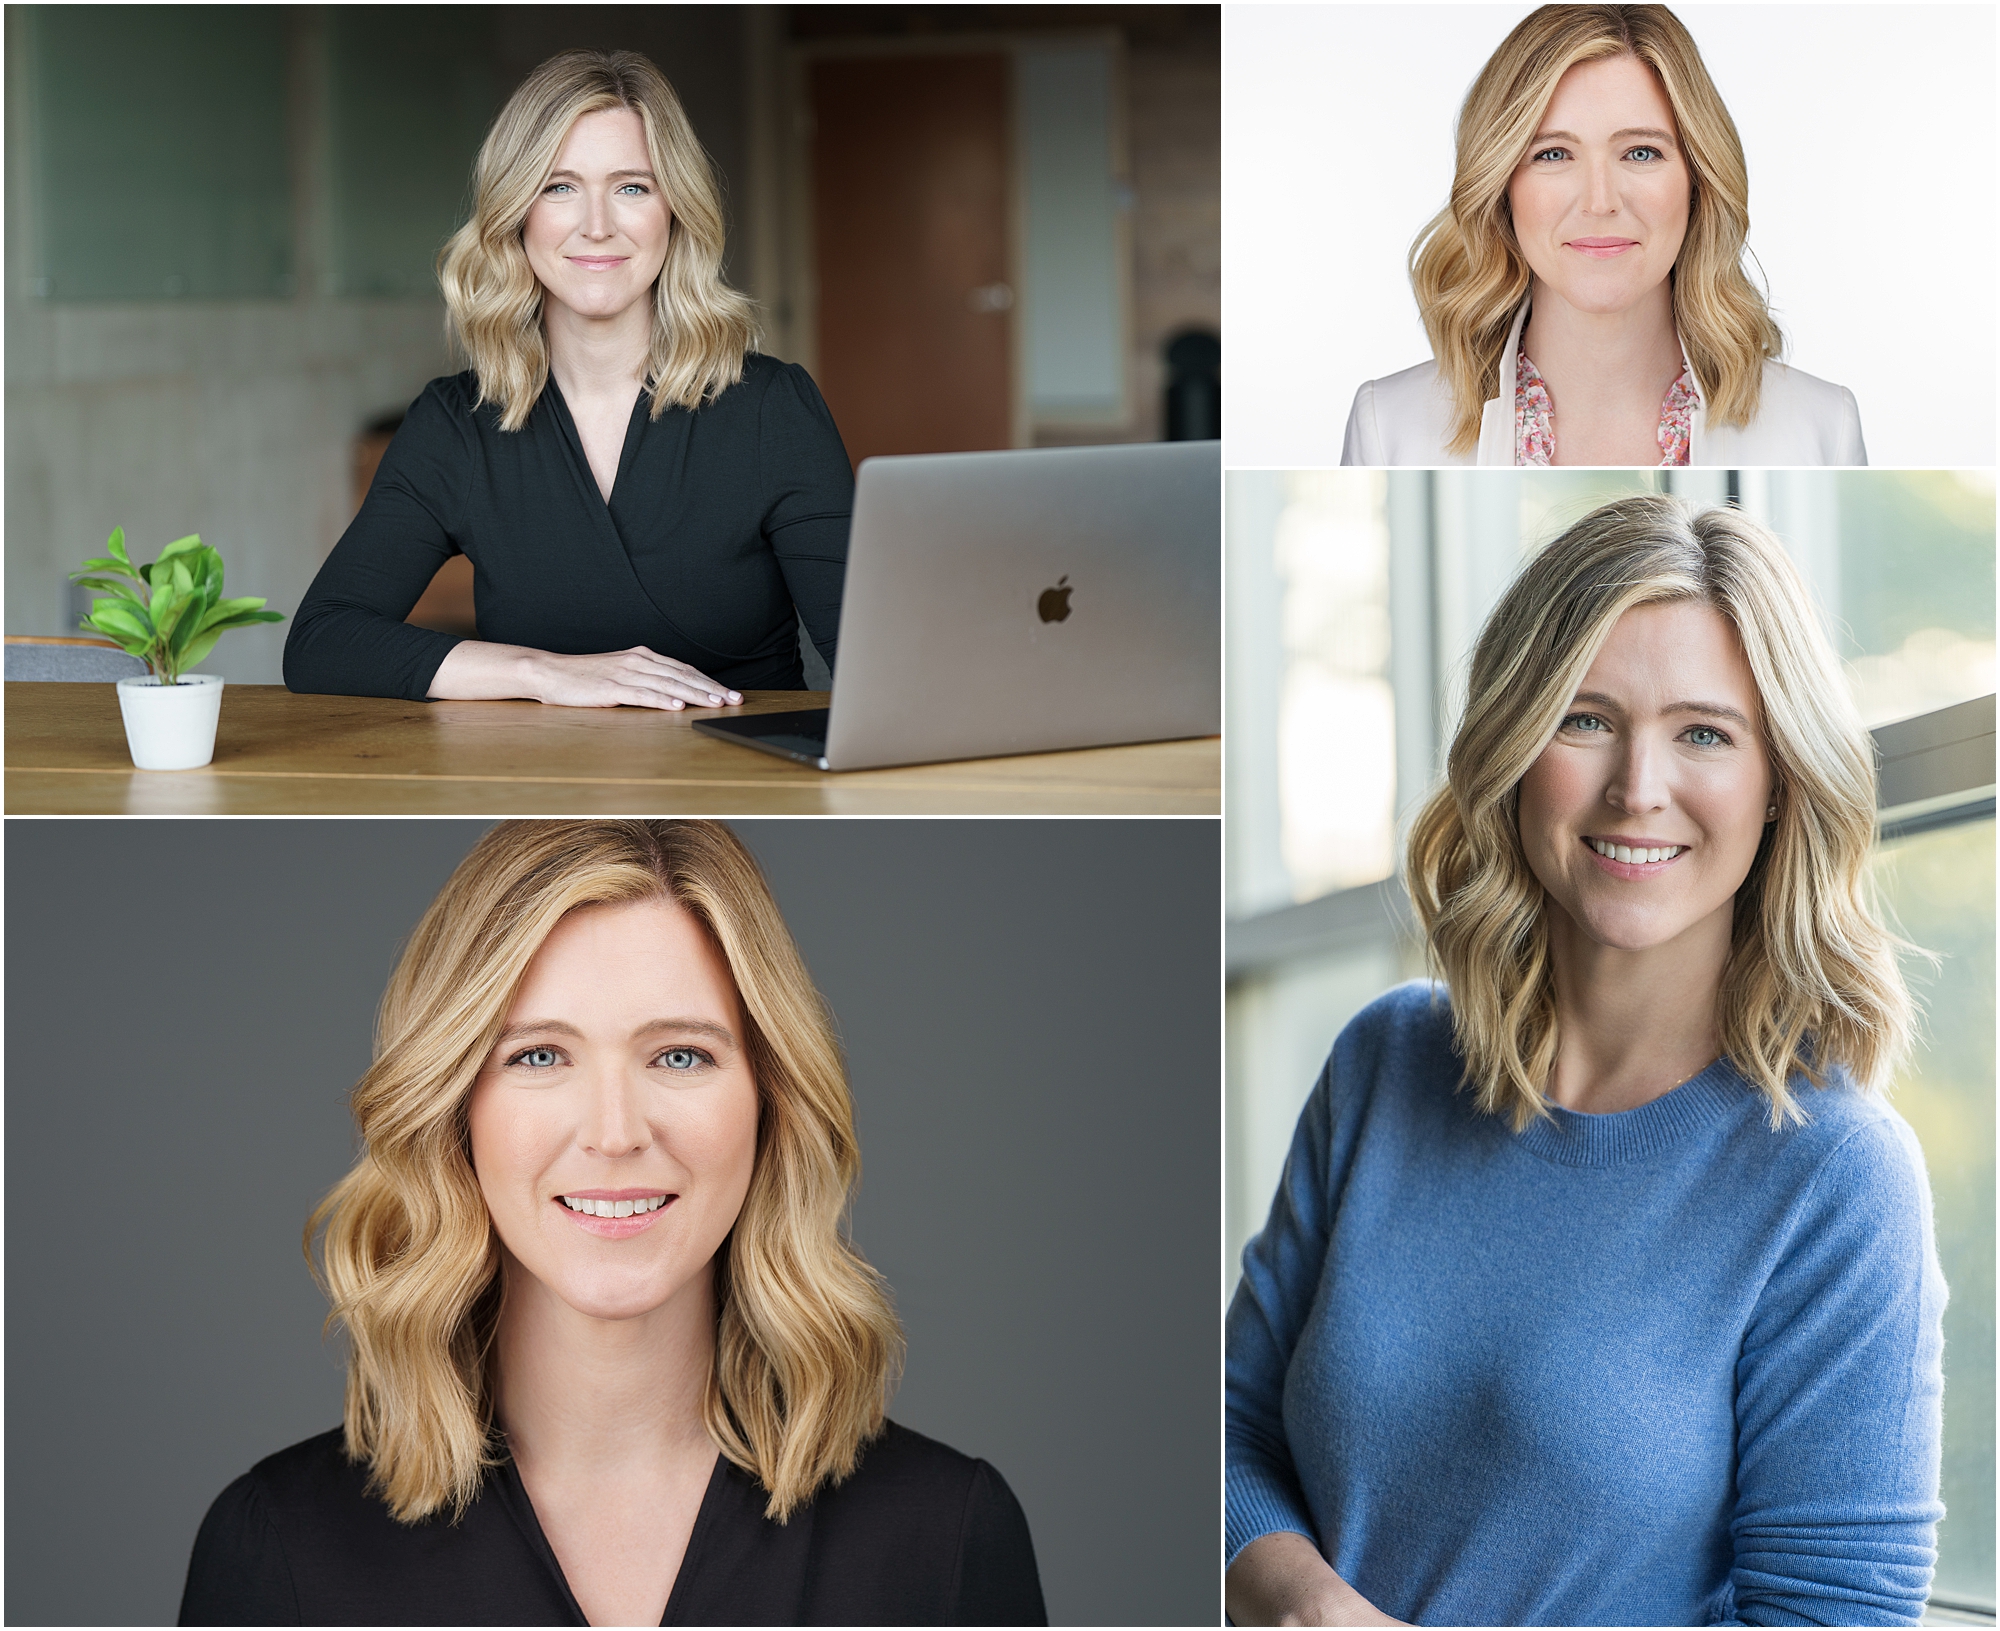 collage of headshot and branding shots of woman to describe experience and pricing